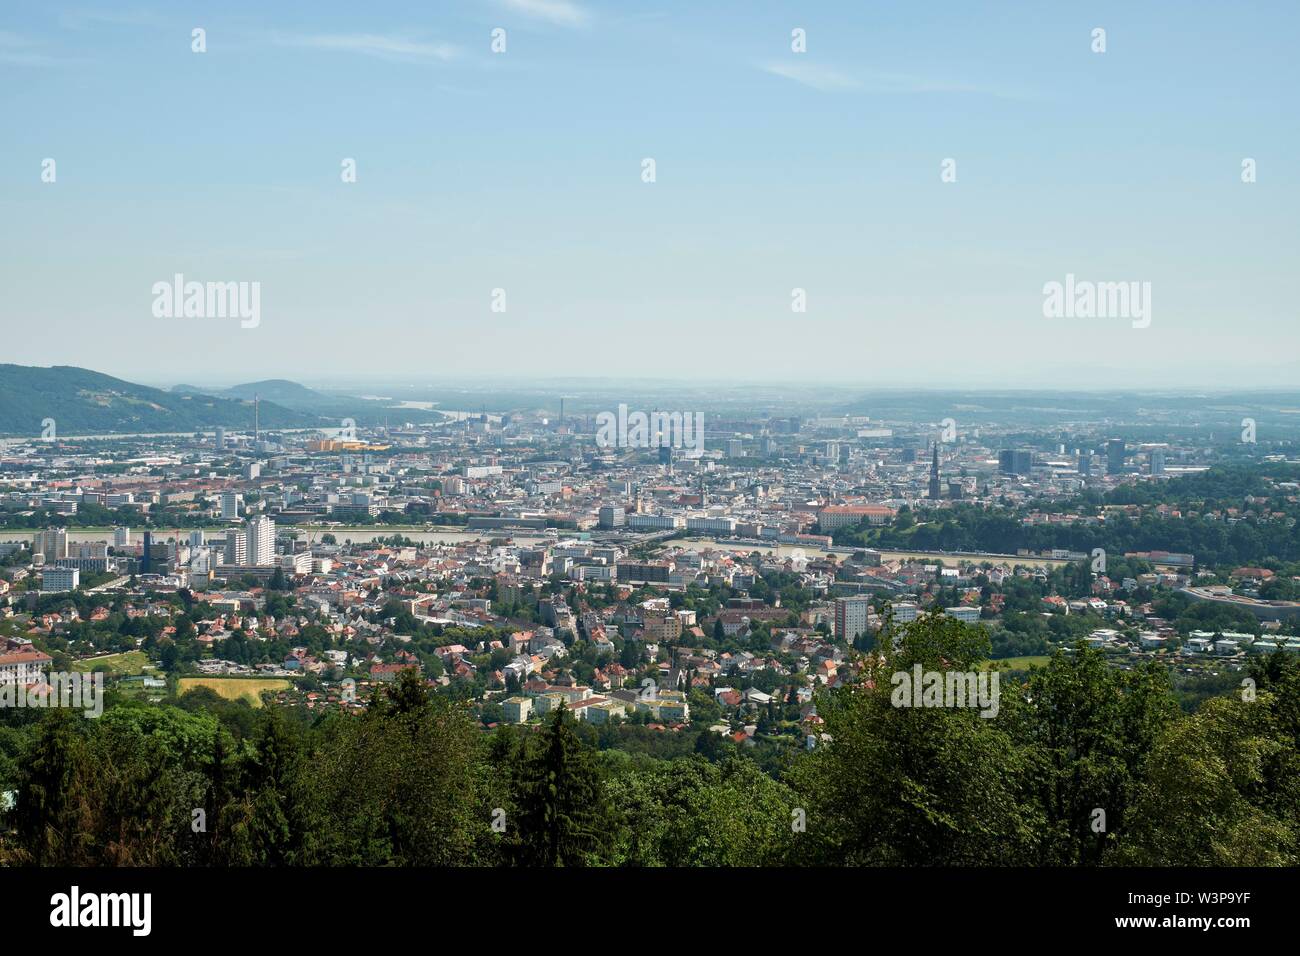 View from Postlingberg to the city of Linz, Austria Stock Photo